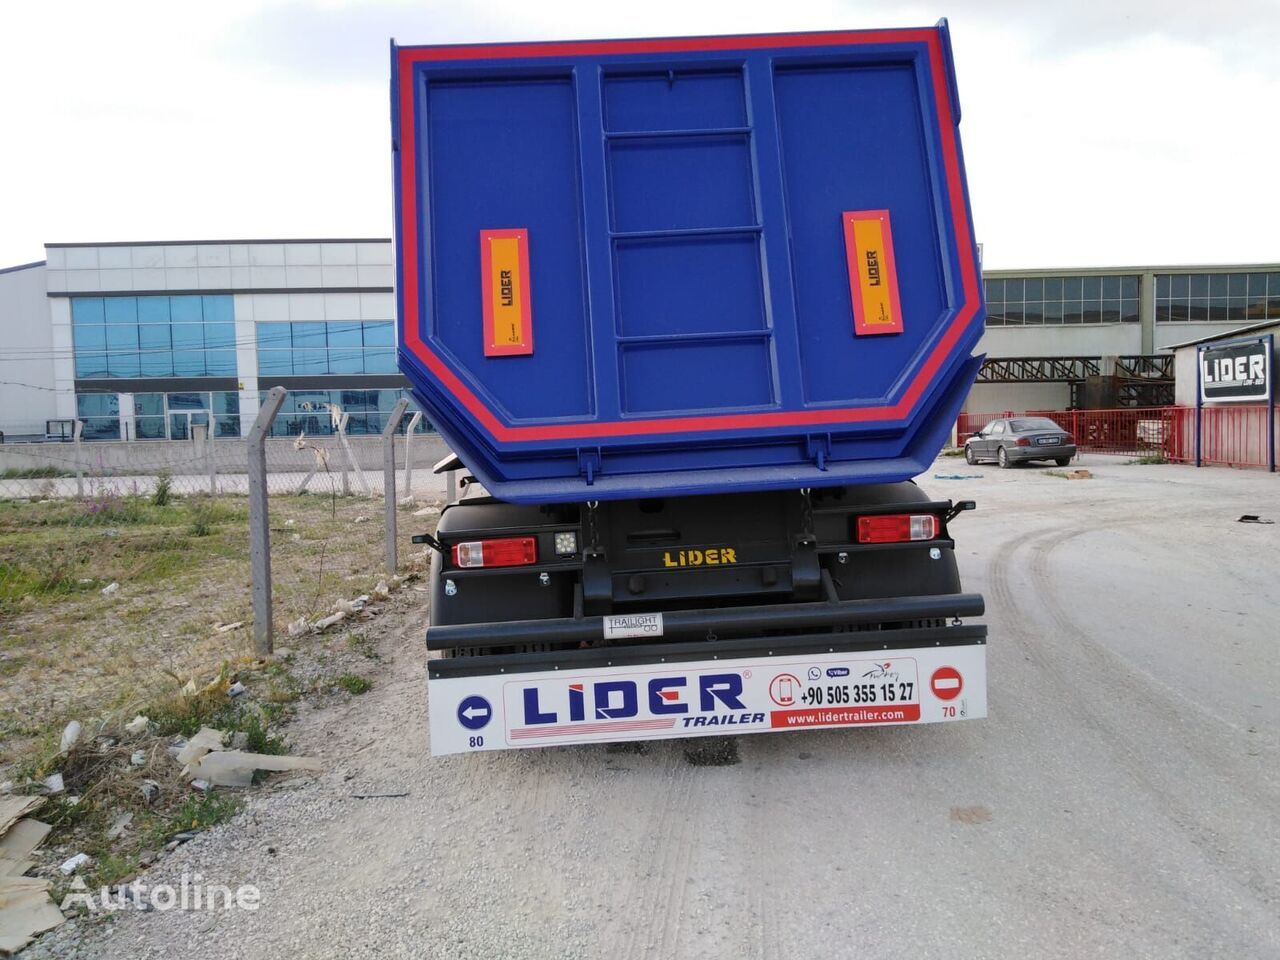 Zakup LIDER 2022 NEW READY IN STOCKS DIRECTLY FROM MANUFACTURER COMPANY LIDER 2022 NEW READY IN STOCKS DIRECTLY FROM MANUFACTURER COMPANY: slika Zakup LIDER 2022 NEW READY IN STOCKS DIRECTLY FROM MANUFACTURER COMPANY LIDER 2022 NEW READY IN STOCKS DIRECTLY FROM MANUFACTURER COMPANY